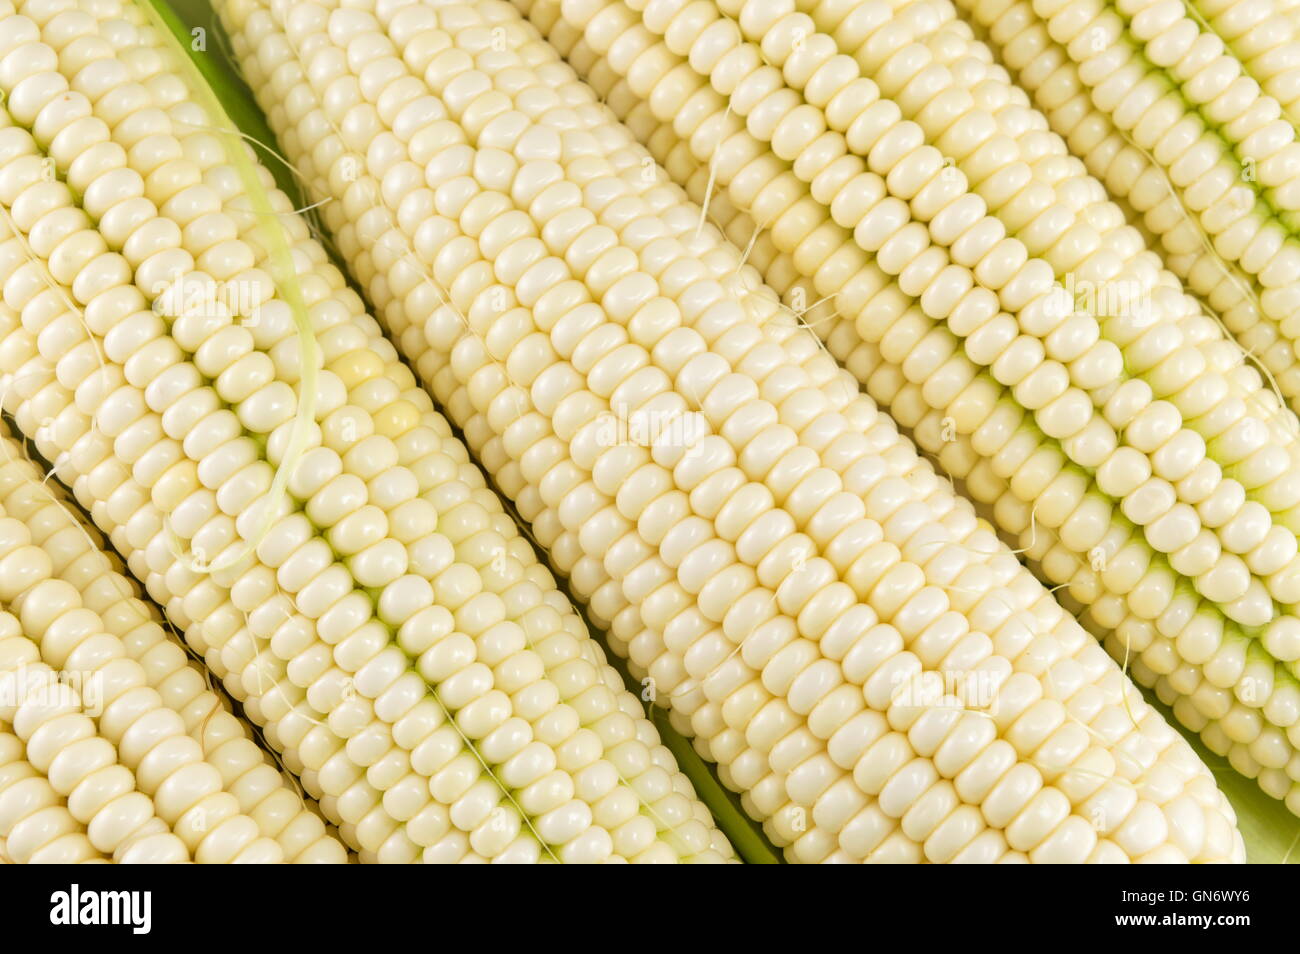 Freshly picked corn cobs in a row Stock Photo